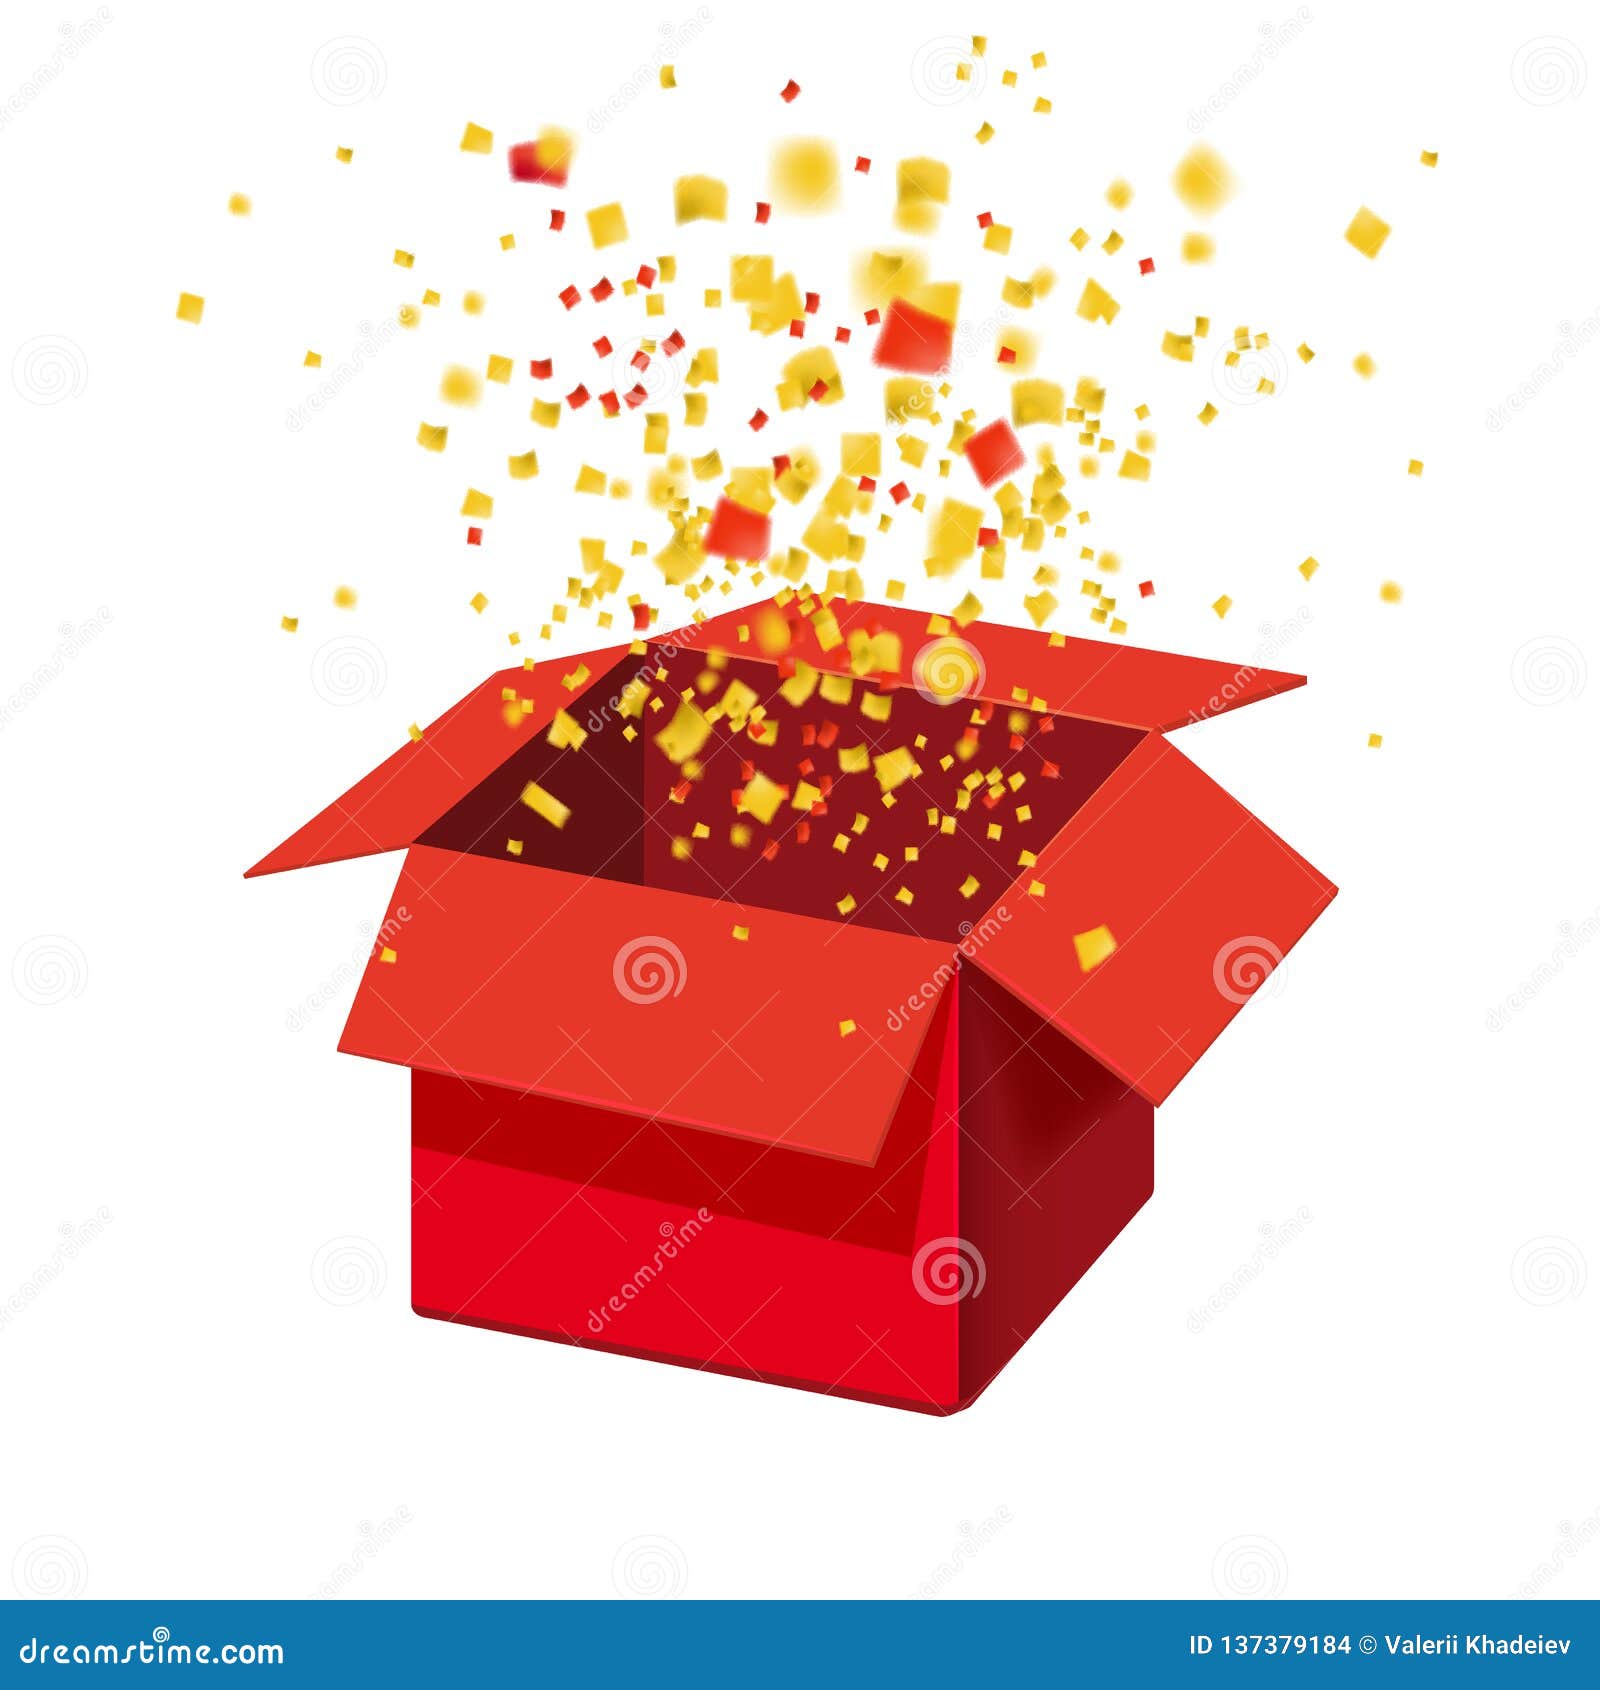 box exploision, blast. open red gift box and confetti. enter to win prizes. win, lottery, quiz.  